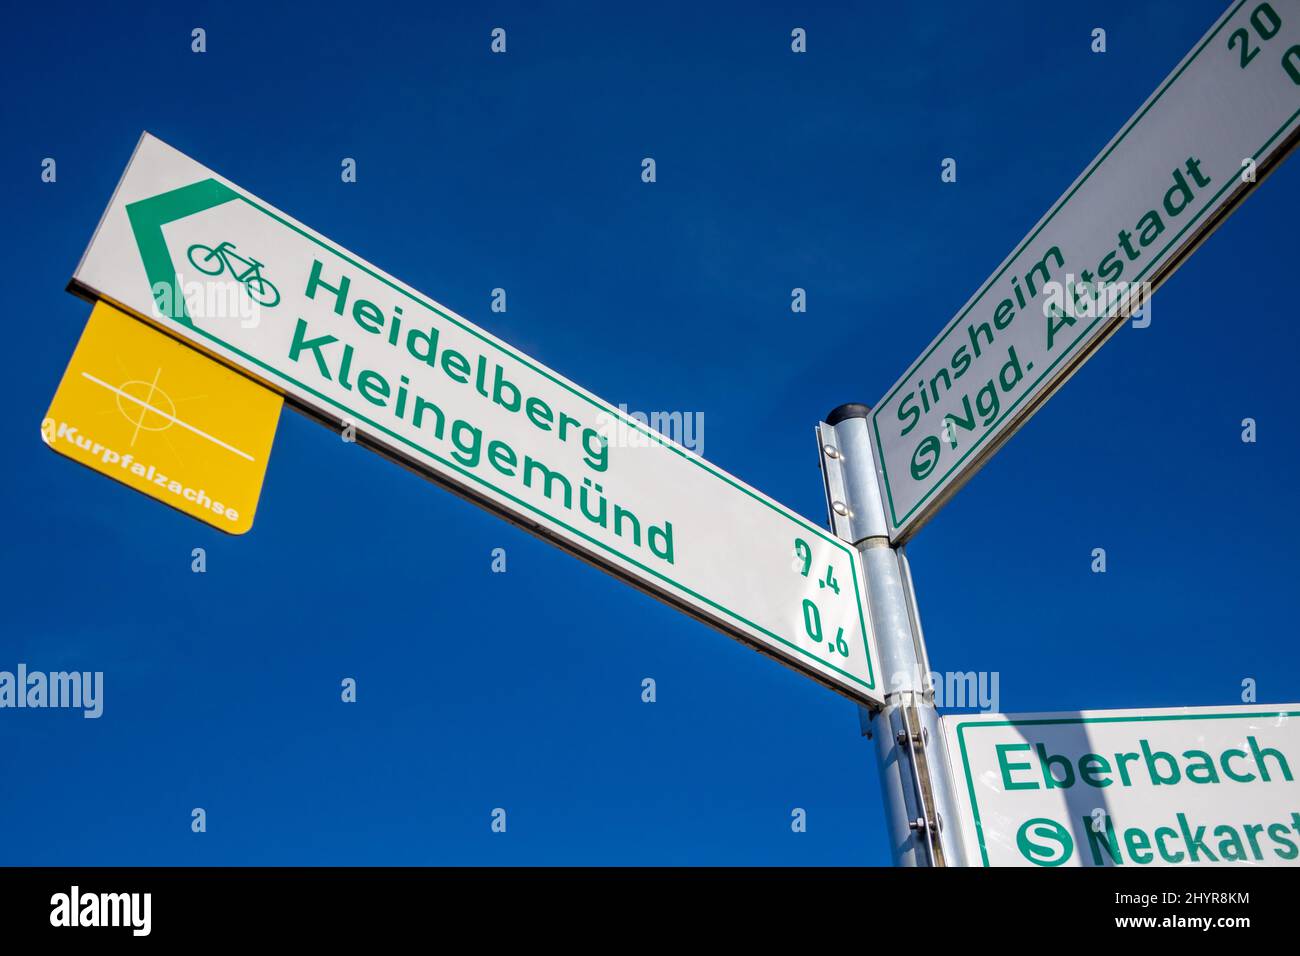 Signpost for bicycle tours with distance information which guides to 'Heidelberg', 'Kleingemuend', 'Sinsheim' and 'Eberbach' in Baden-Wuerttemberg, Ge Stock Photo